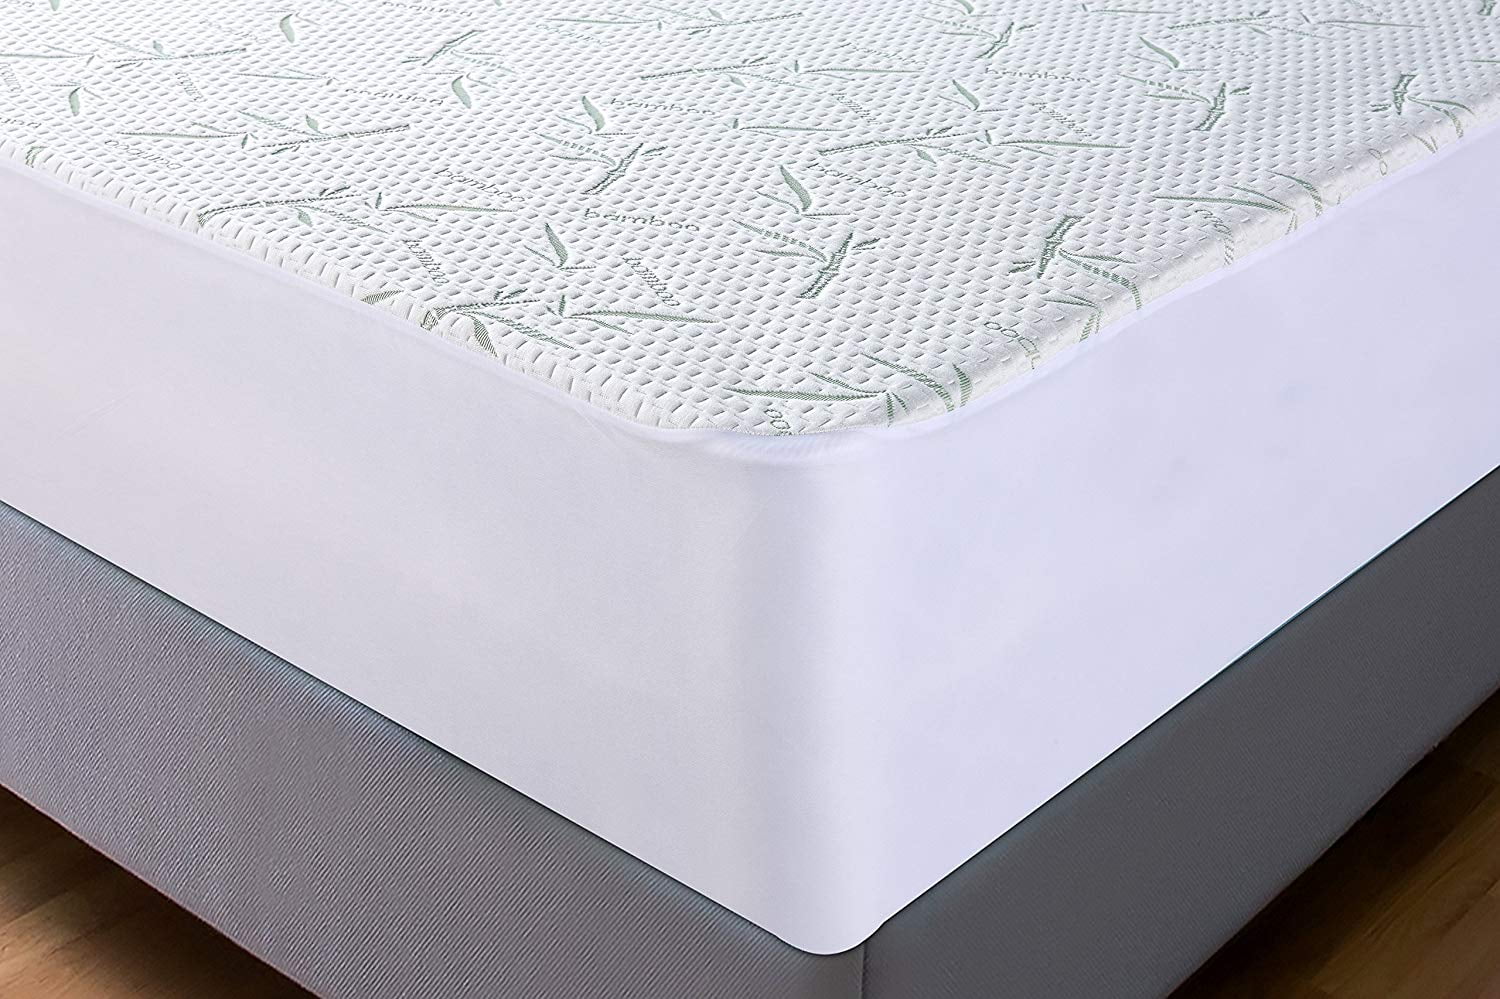 Anti Dustmite EXTRA DEEP SKIRT 50CM BAMBOO Mattress Protector Hypo-allergenic 